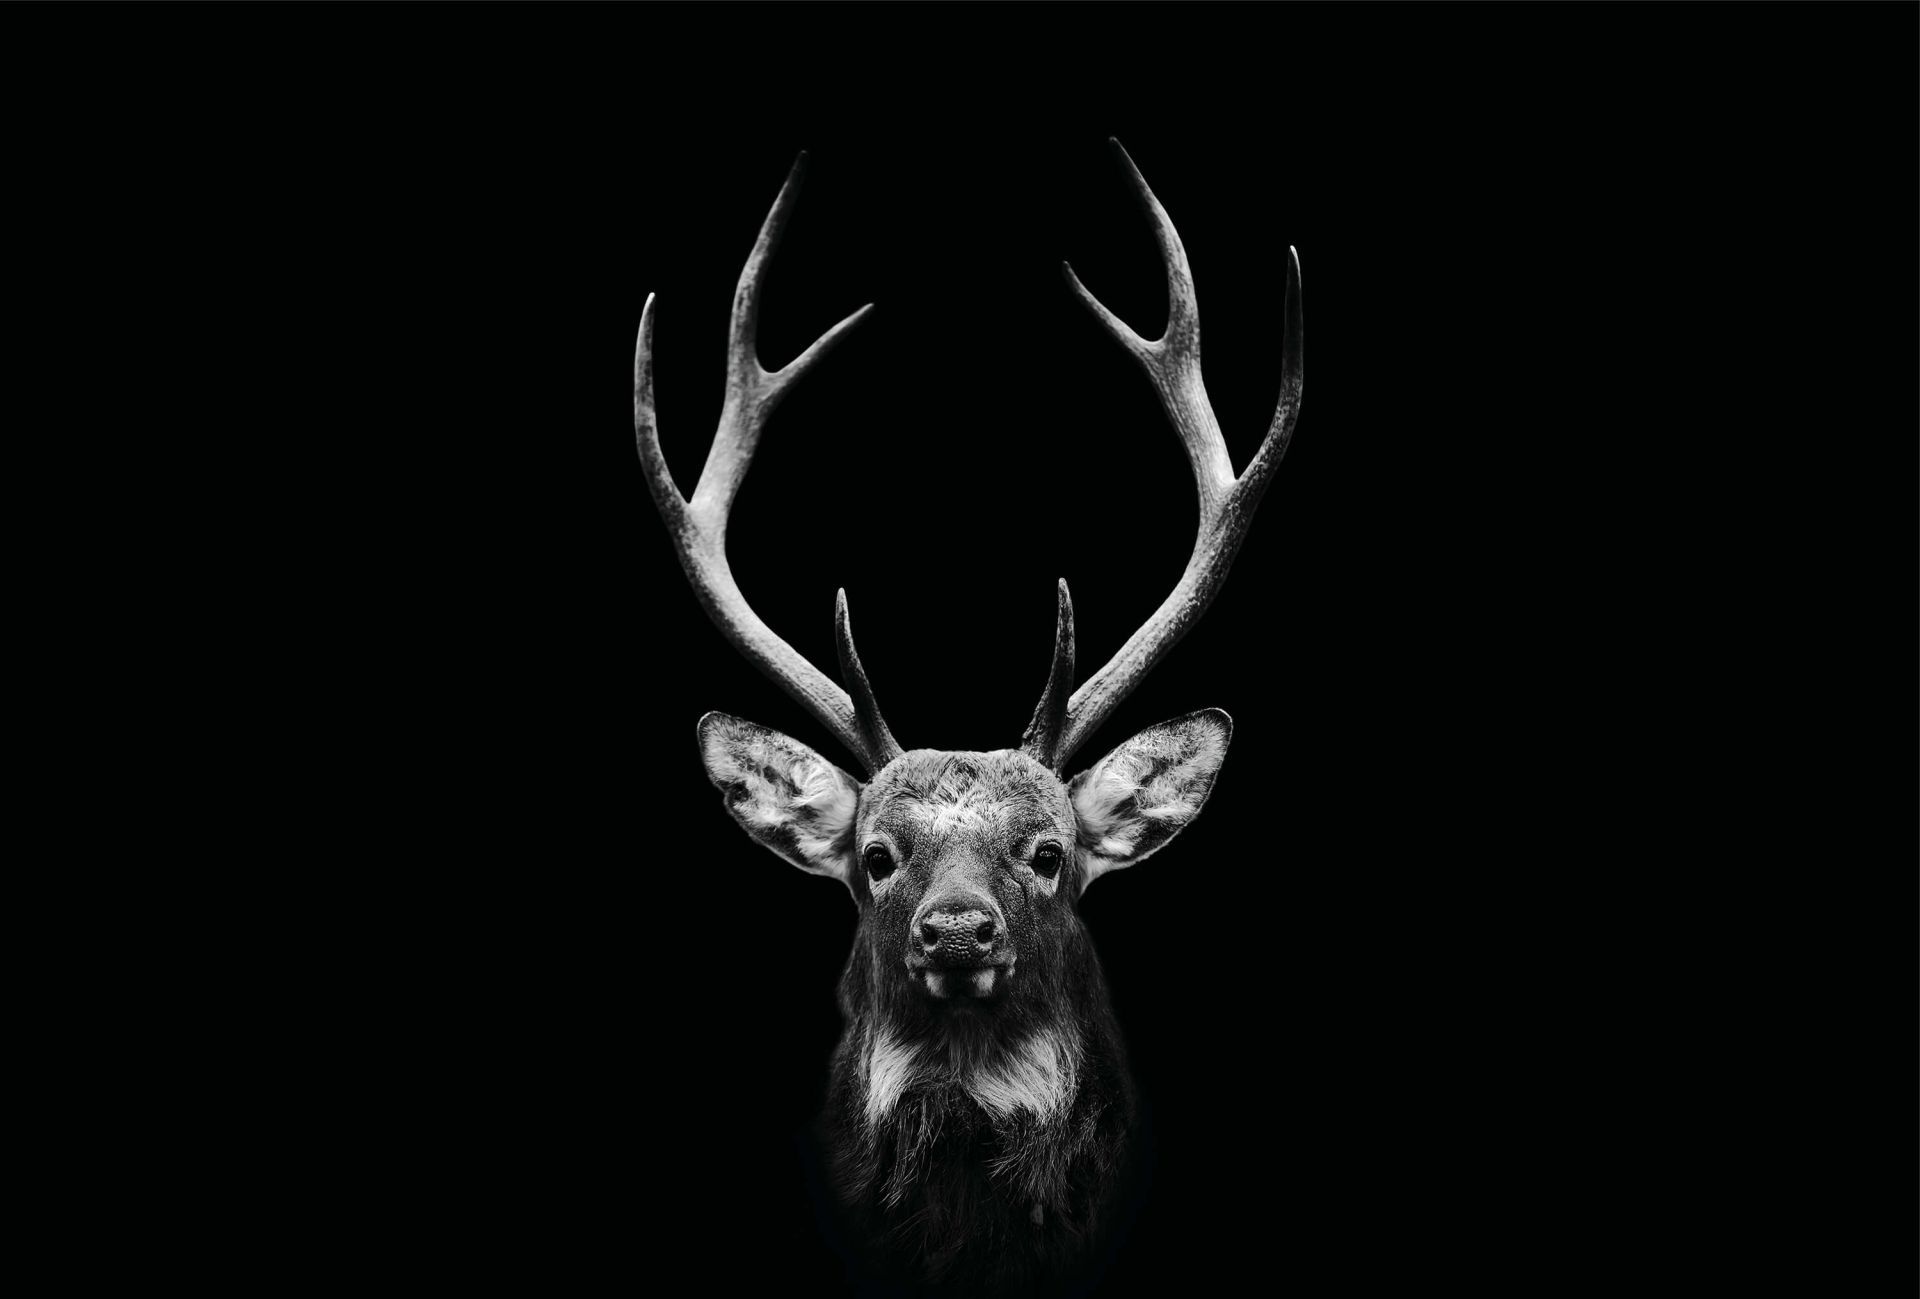 A deer with antlers in black and white. - Deer